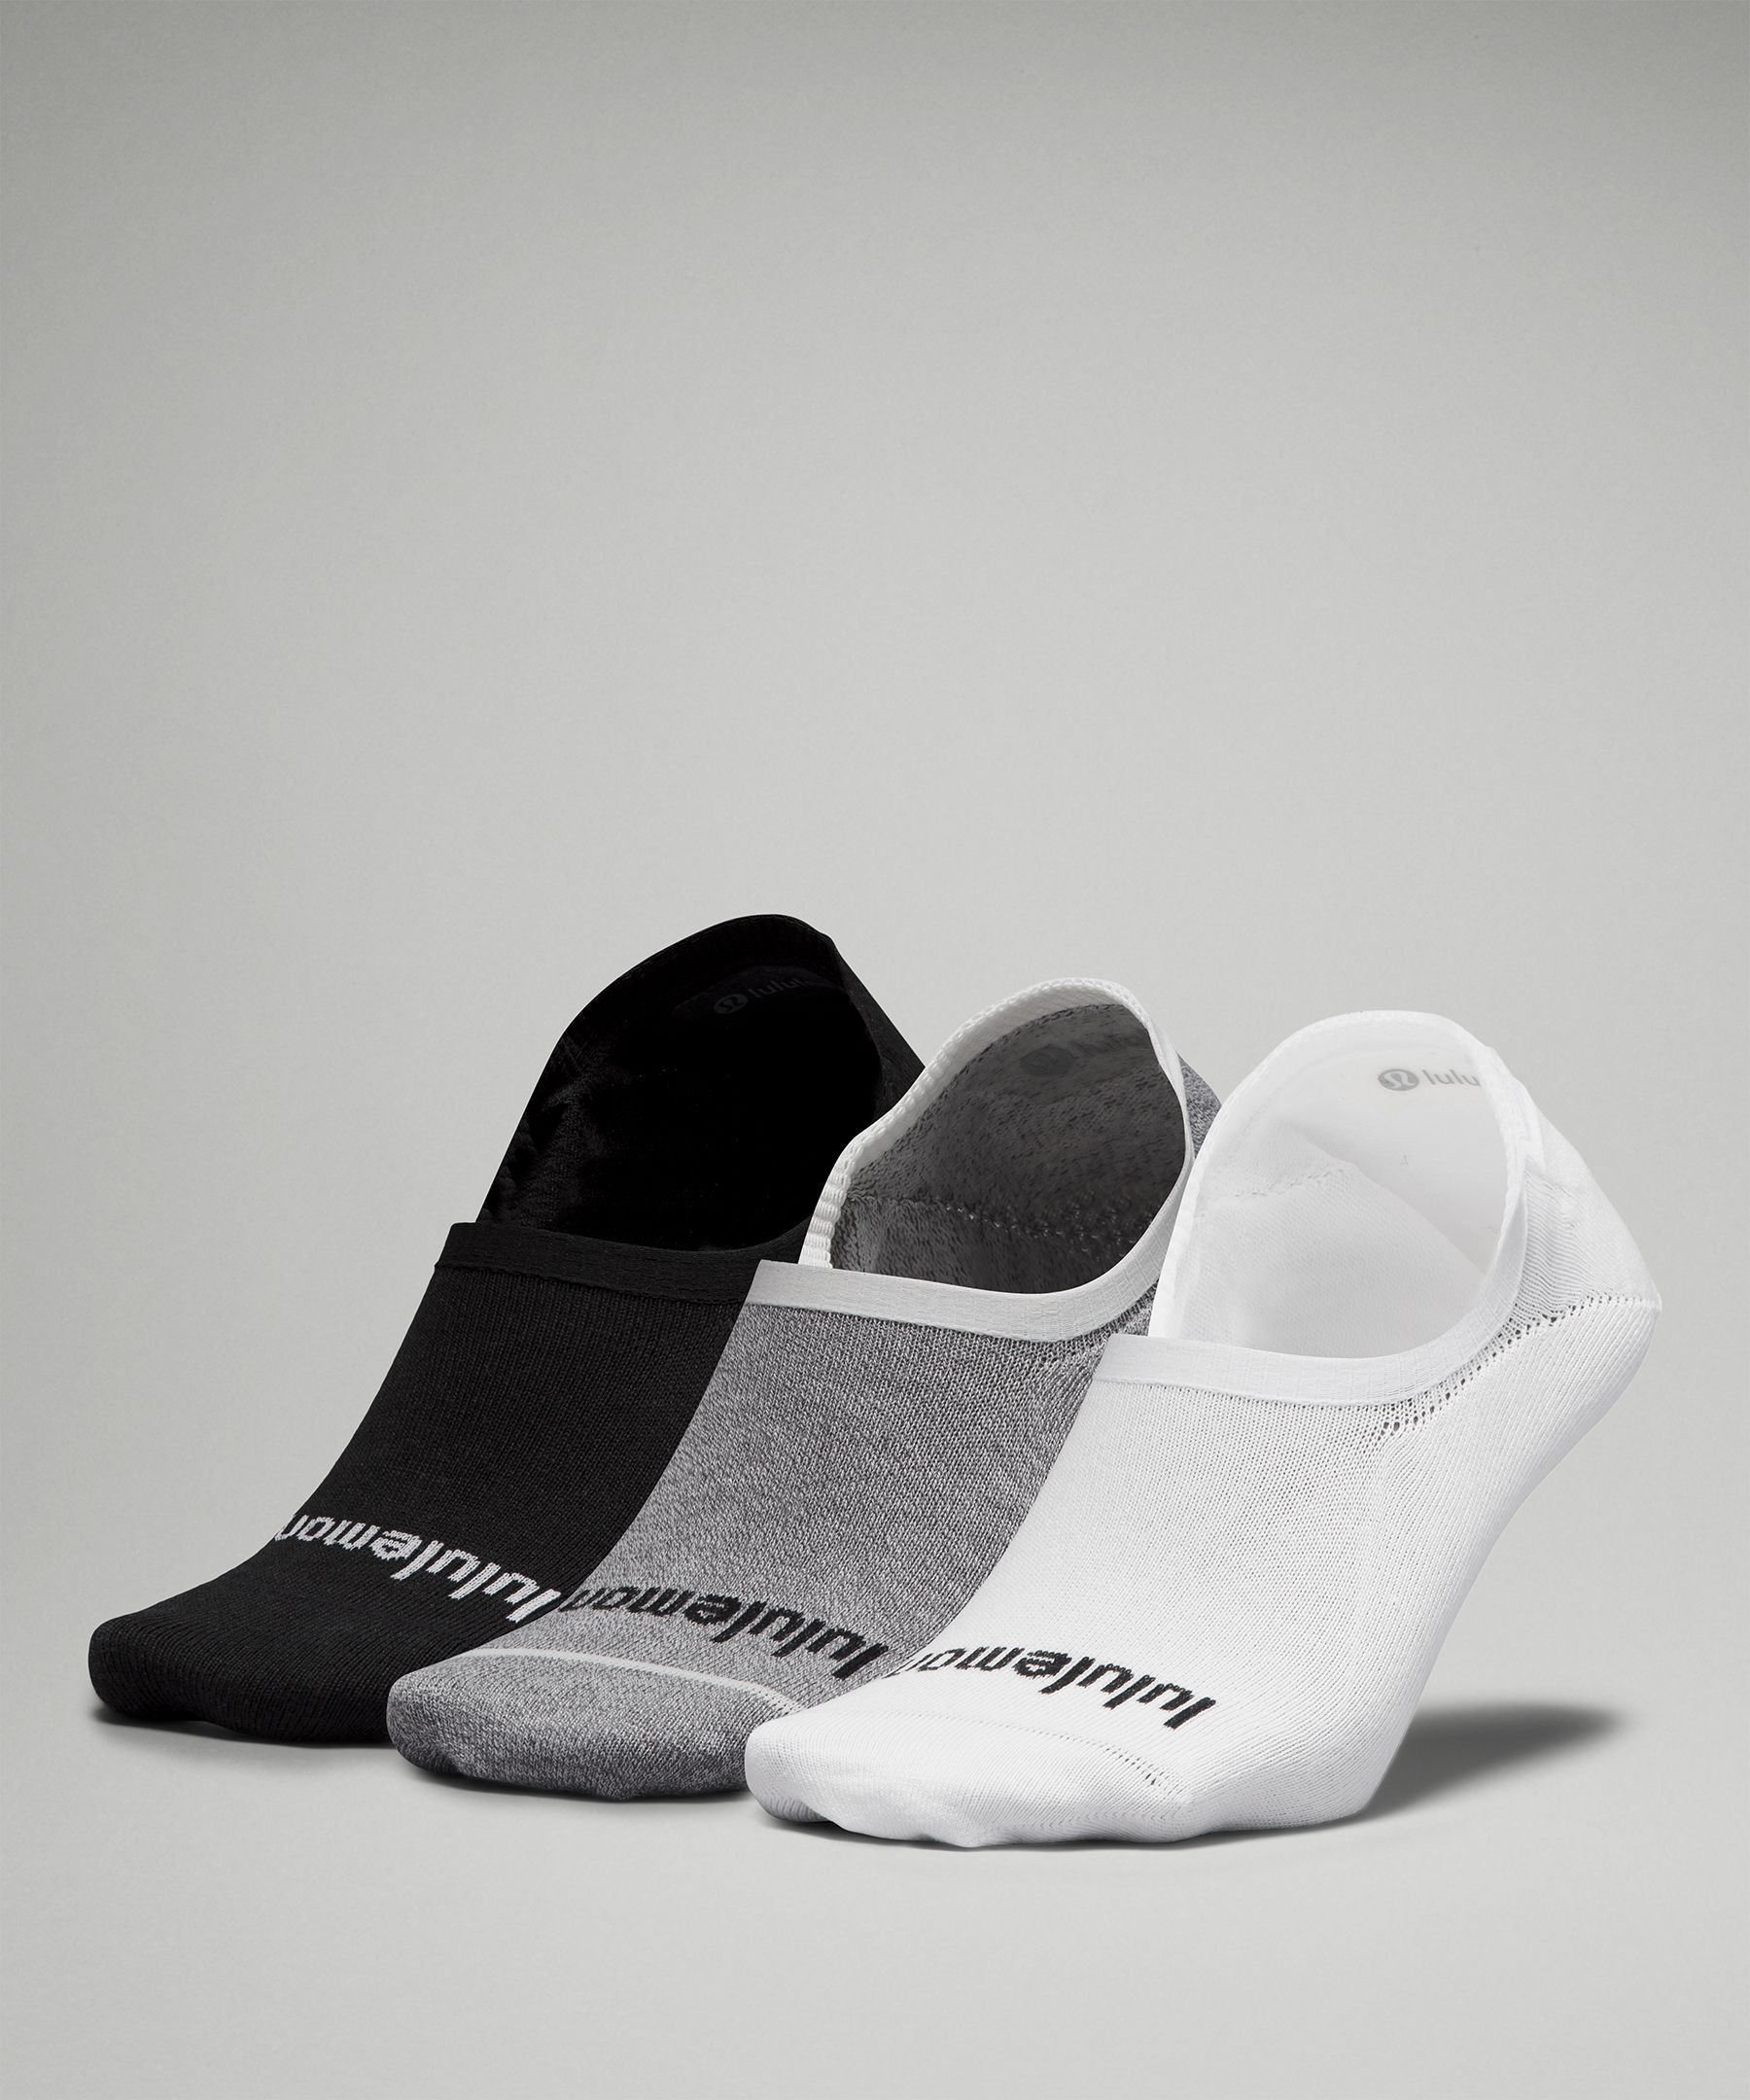 5 reasons to buy/not to buy the Lululemon Power Stride Crew Socks Reflective